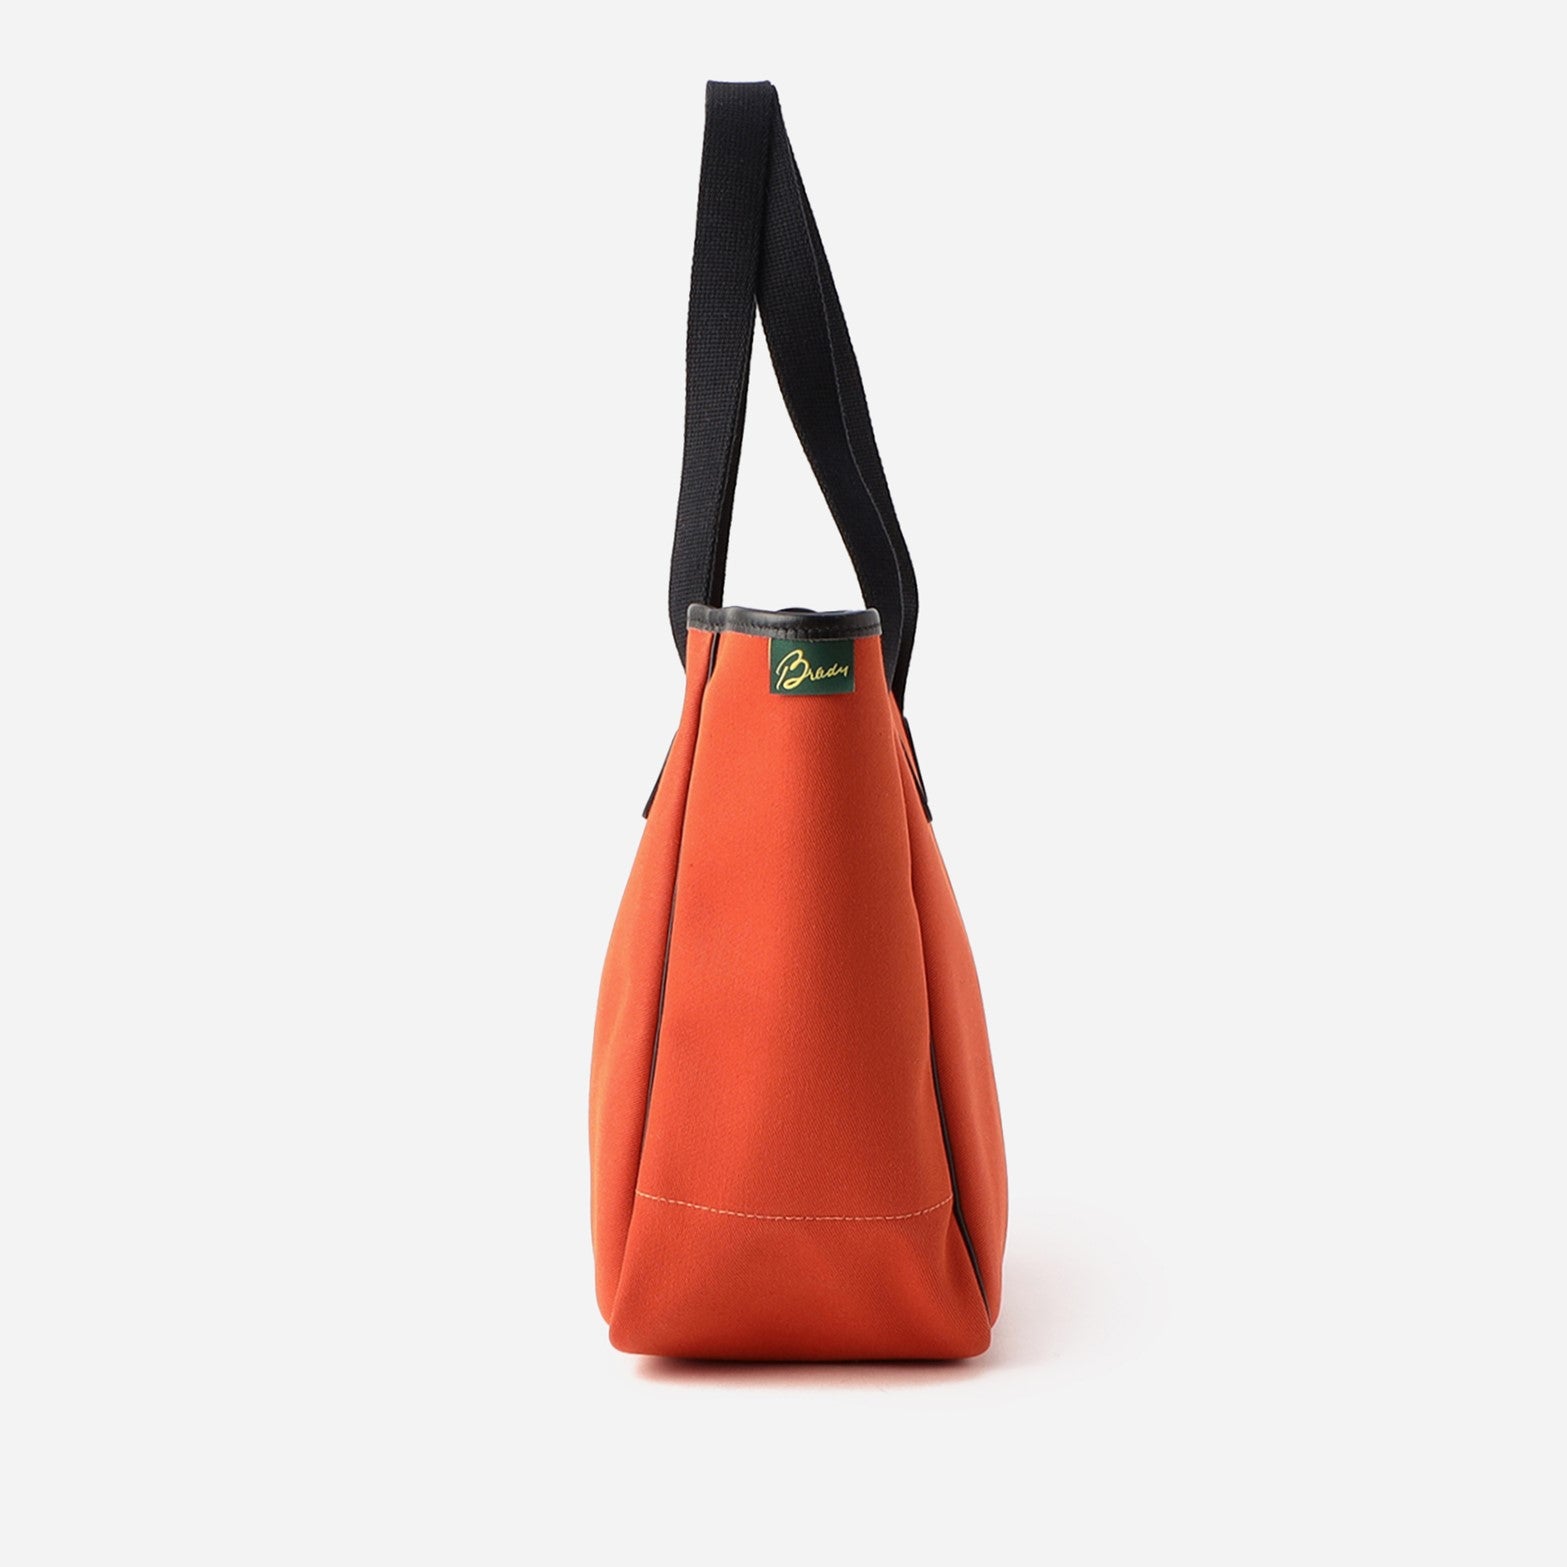 EXTRA SMALL CARRYALL COLOR